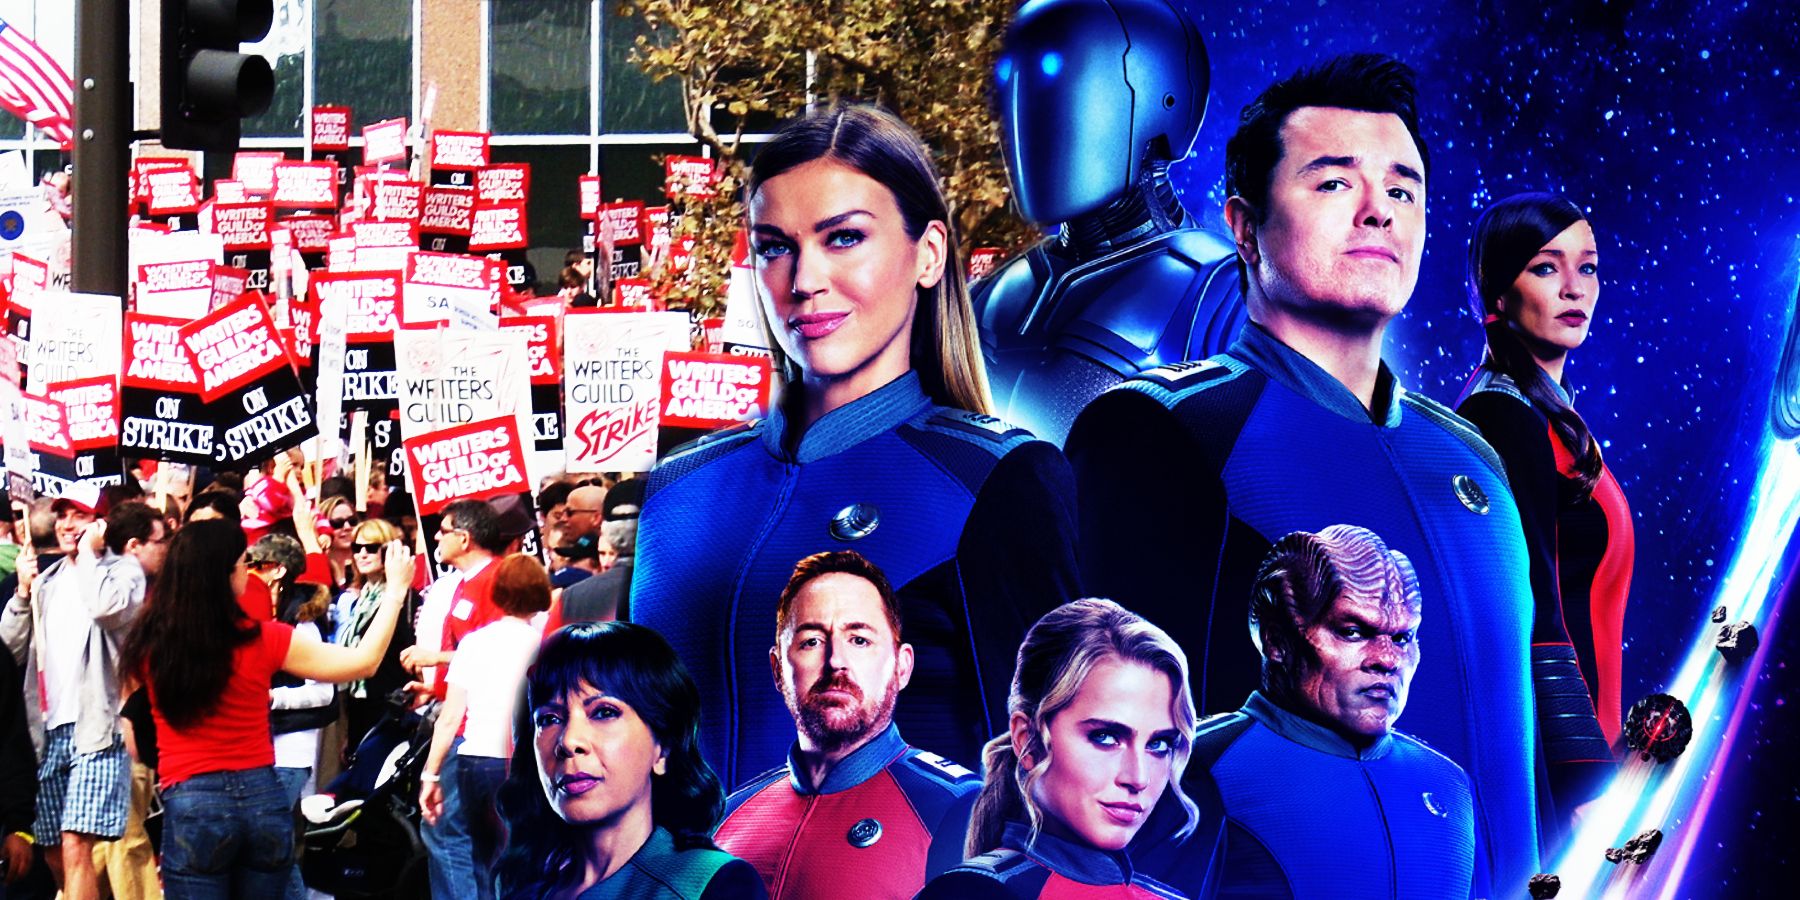 Promotional artwork for The Orville season 3 and the WGA strike